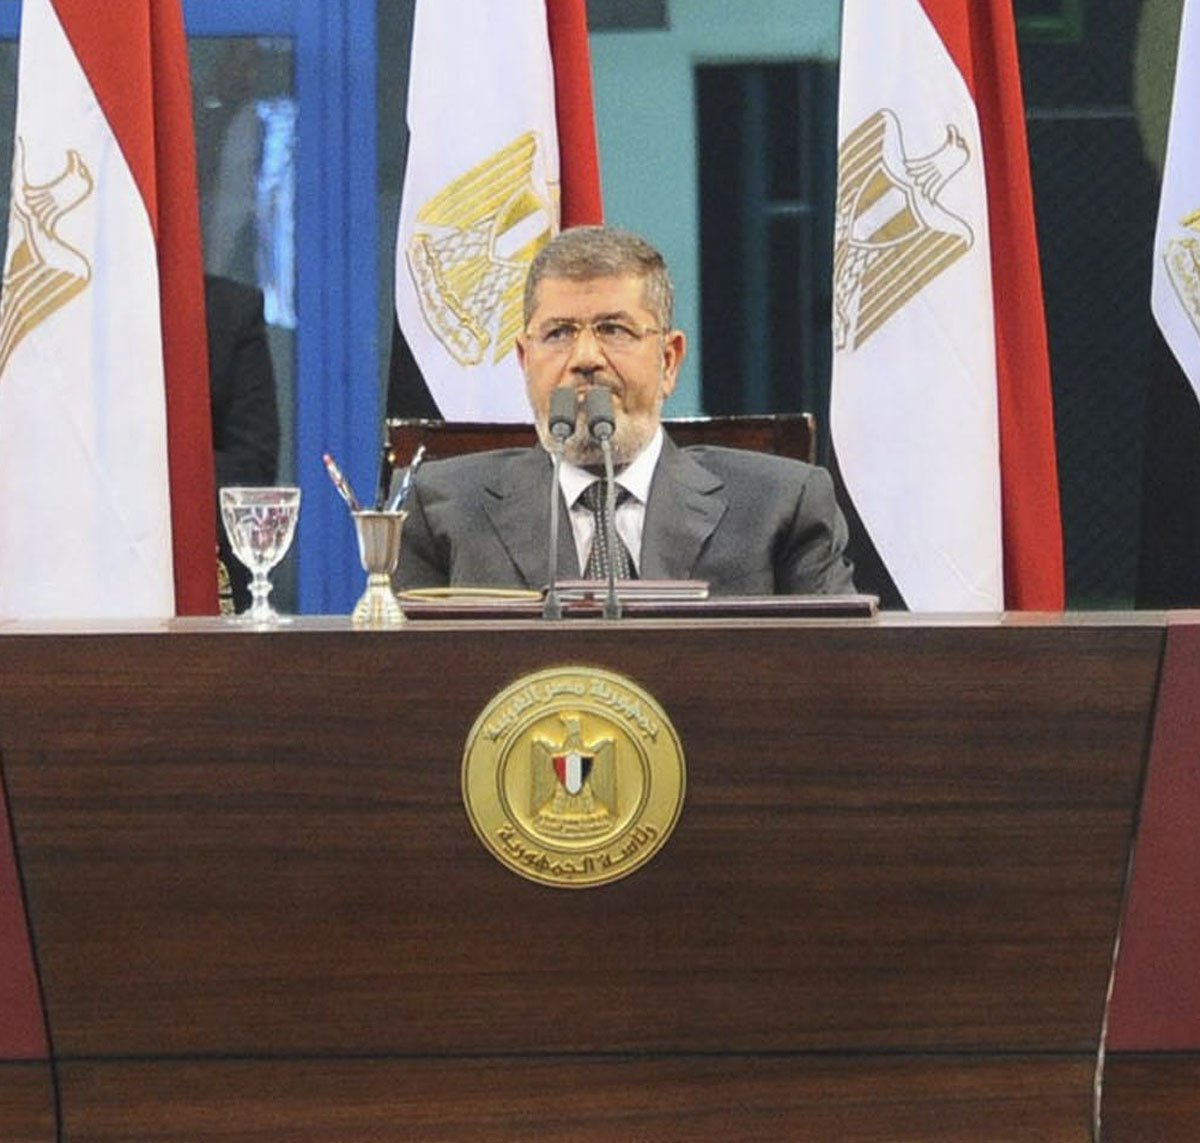 egyptian president morsi attends a syria solidarity conference organised by the muslim brotherhood photo reuters